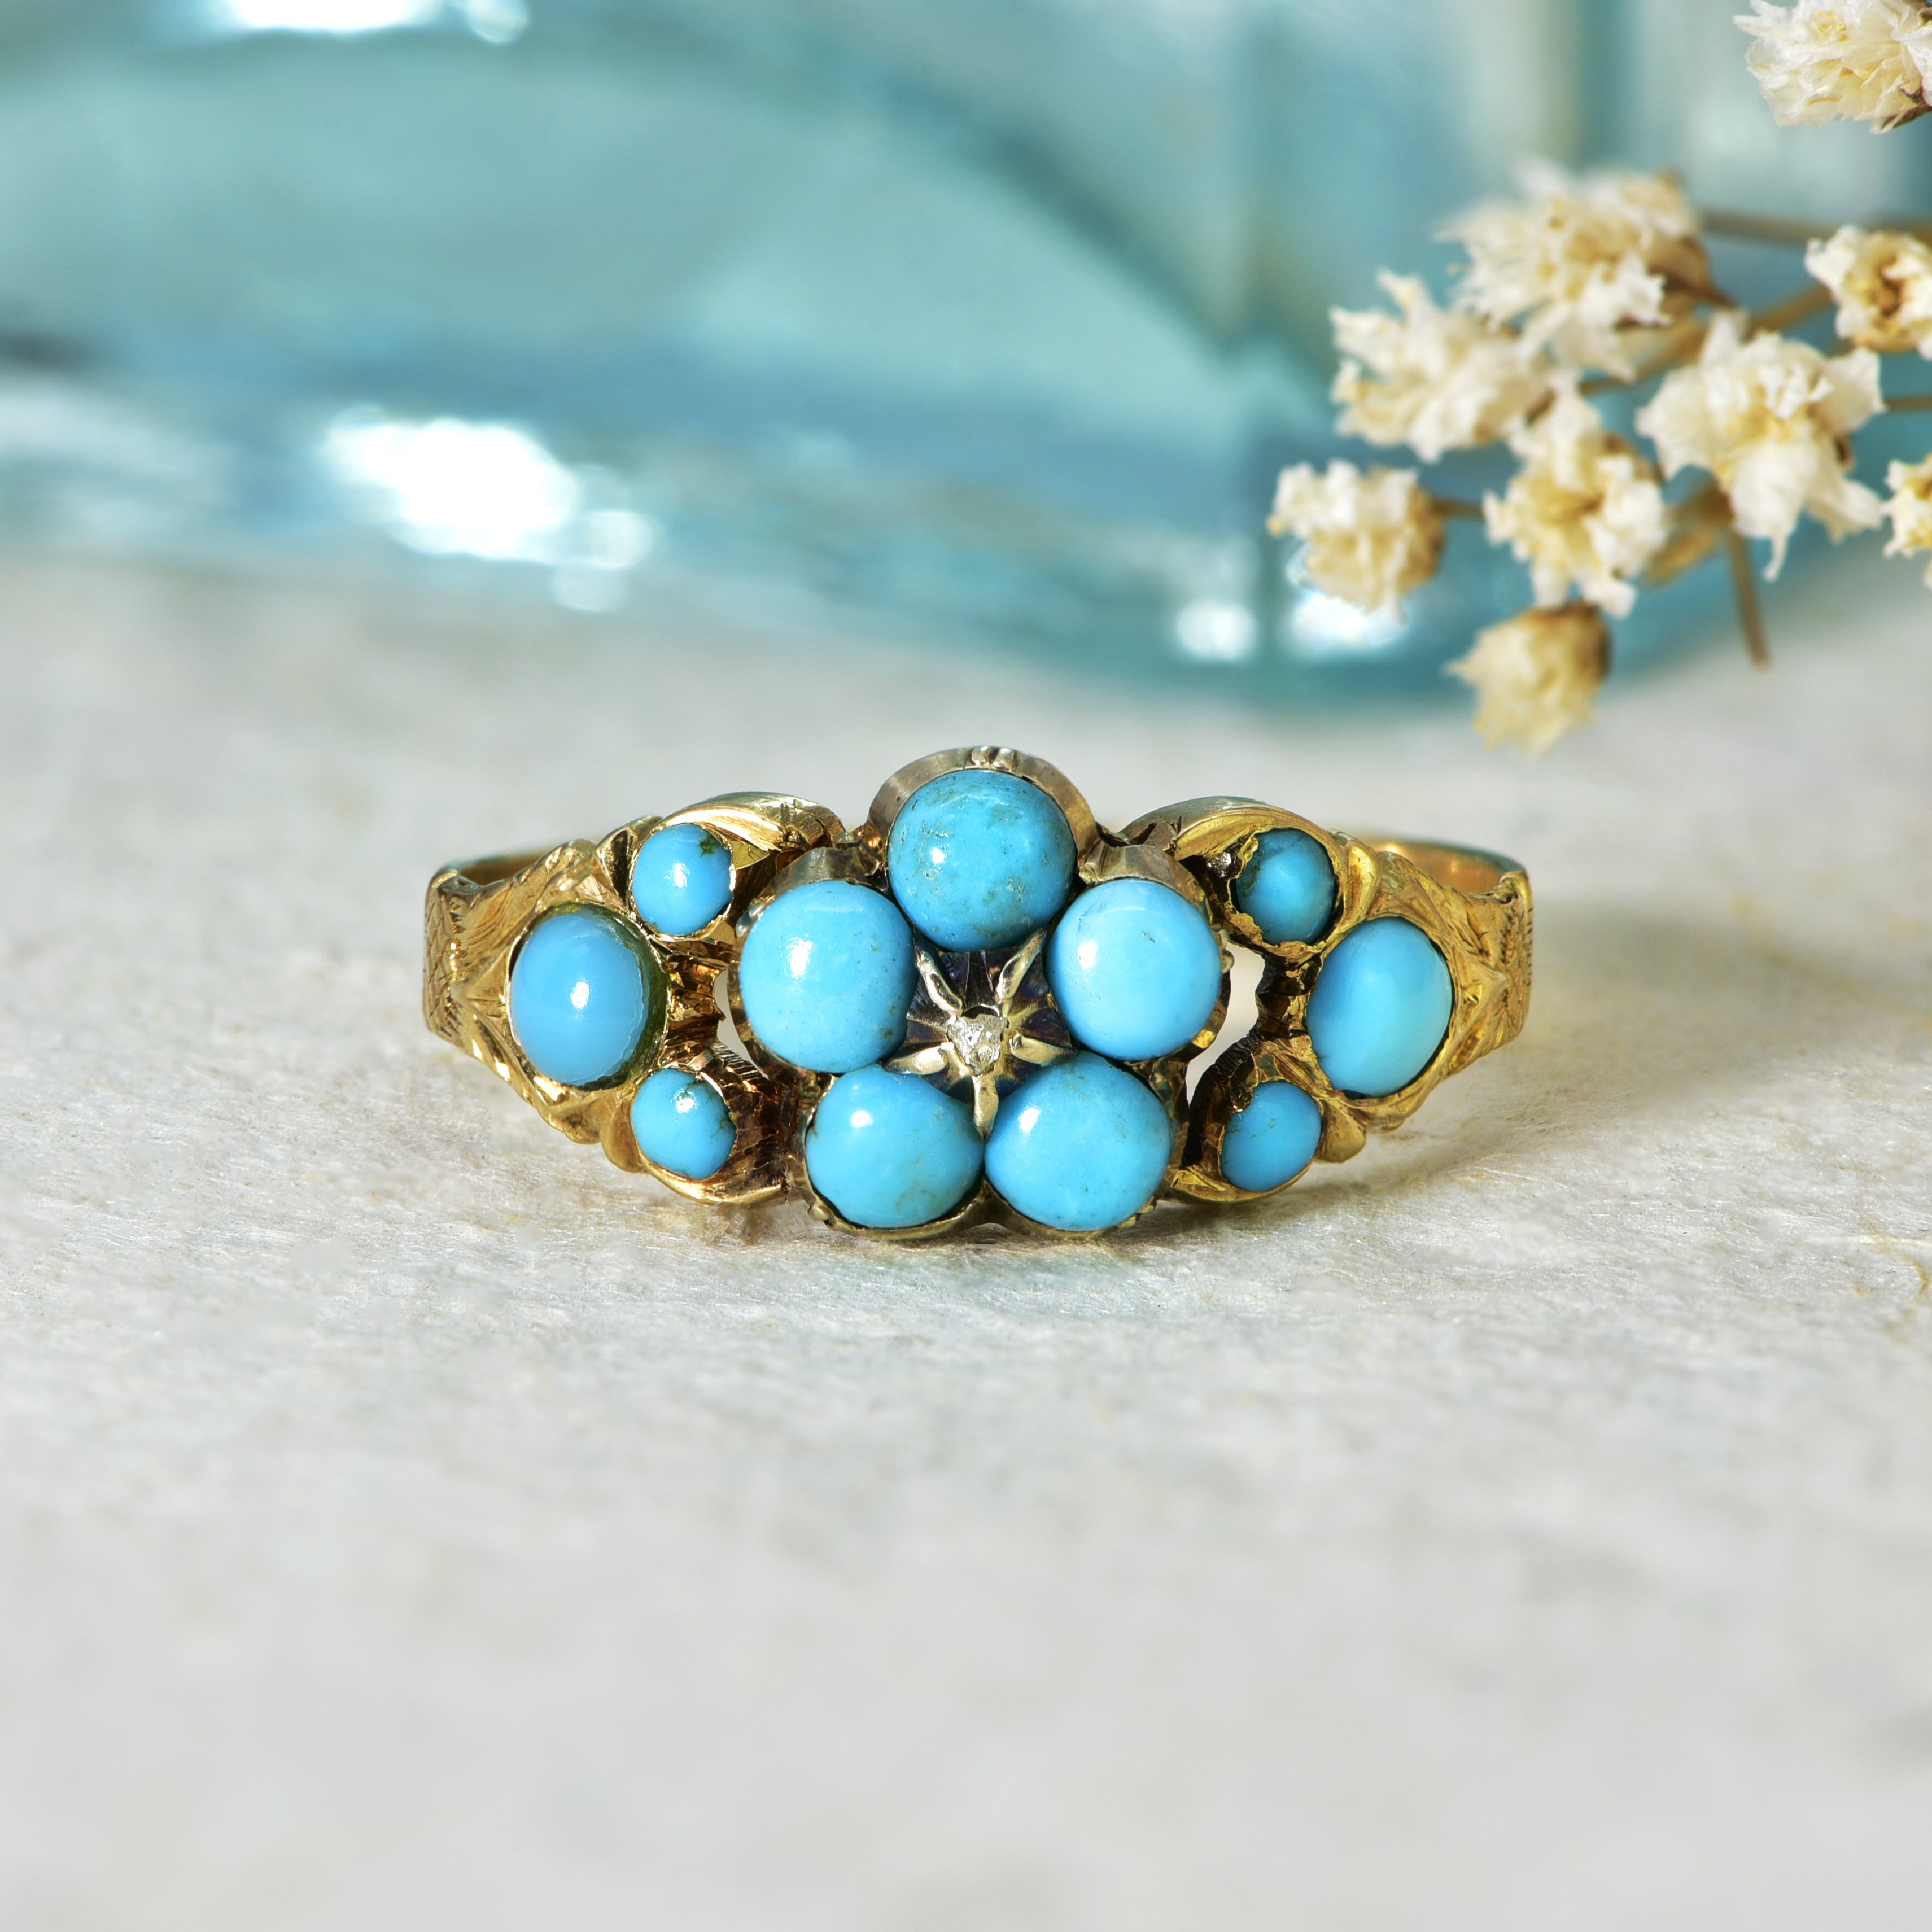 The Antique Victorian Gold and Turquoise Forget-Me-Not Ring - Antique Jewellers